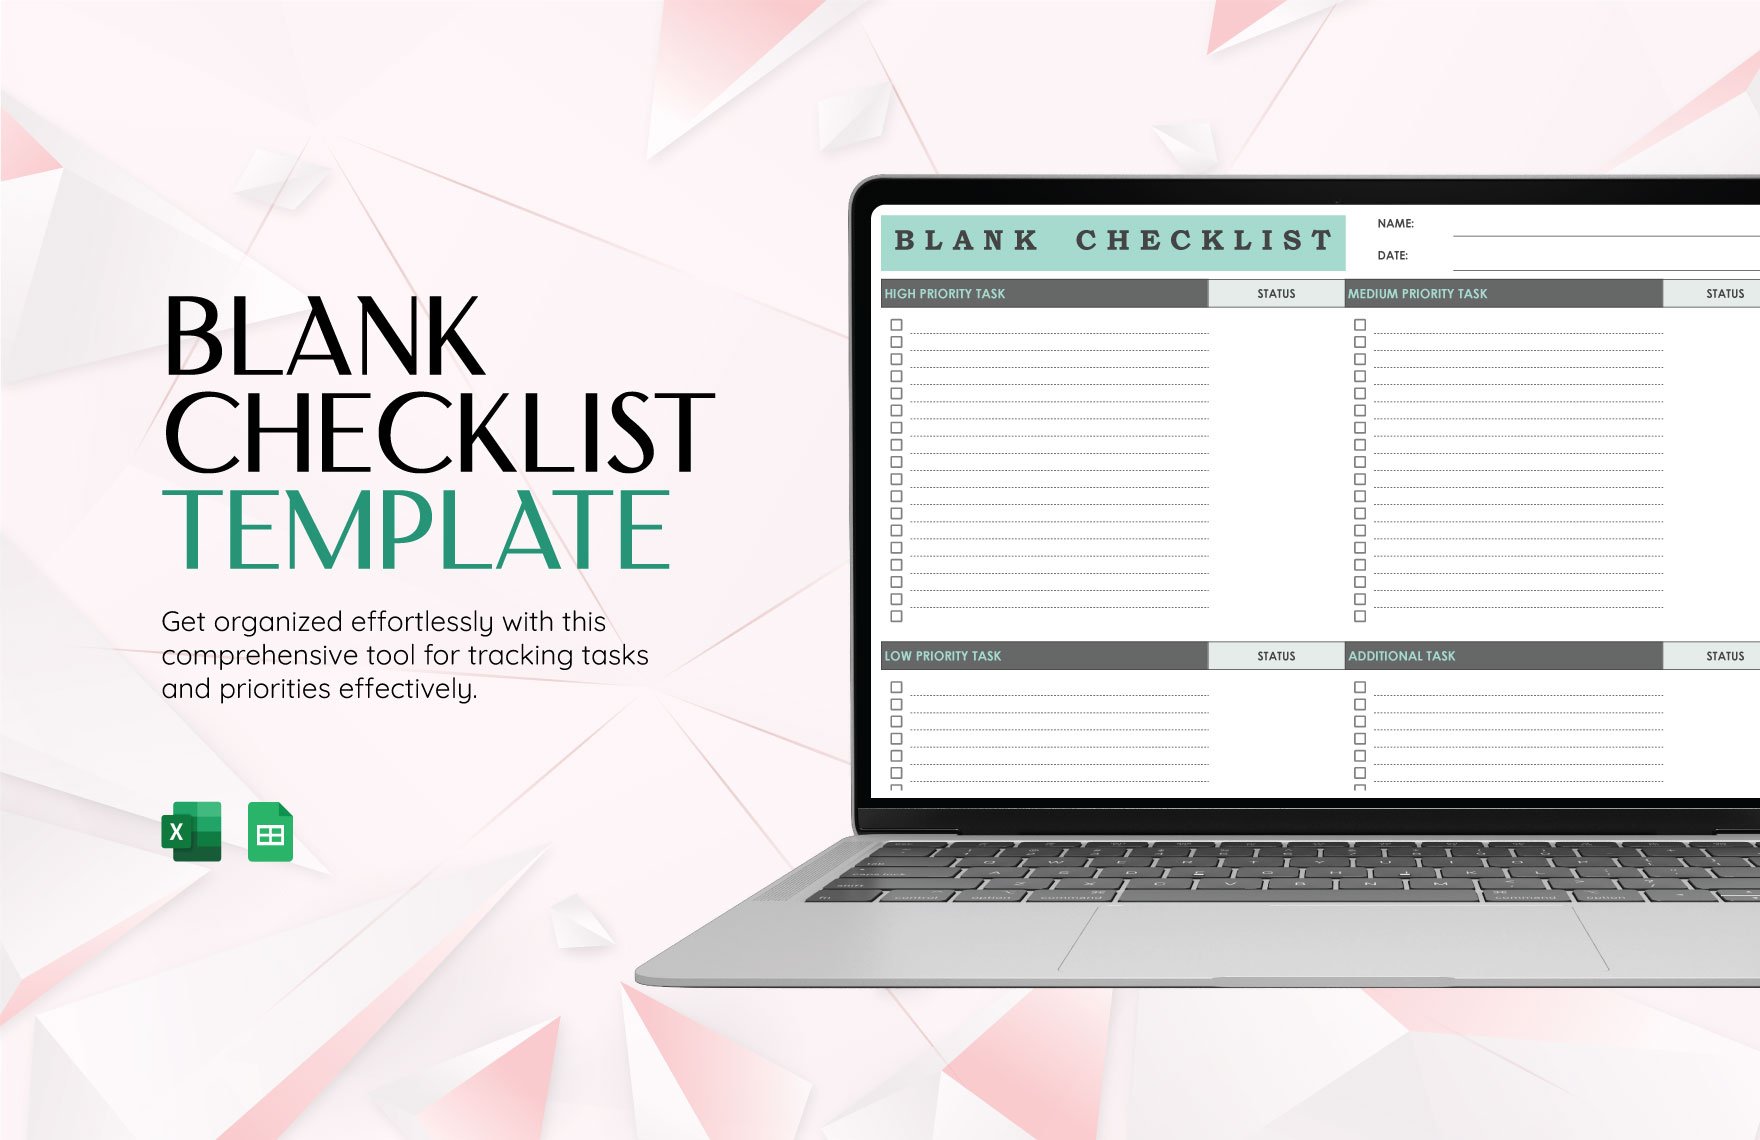 Free Blank Checklist Template in Excel, Google Sheets